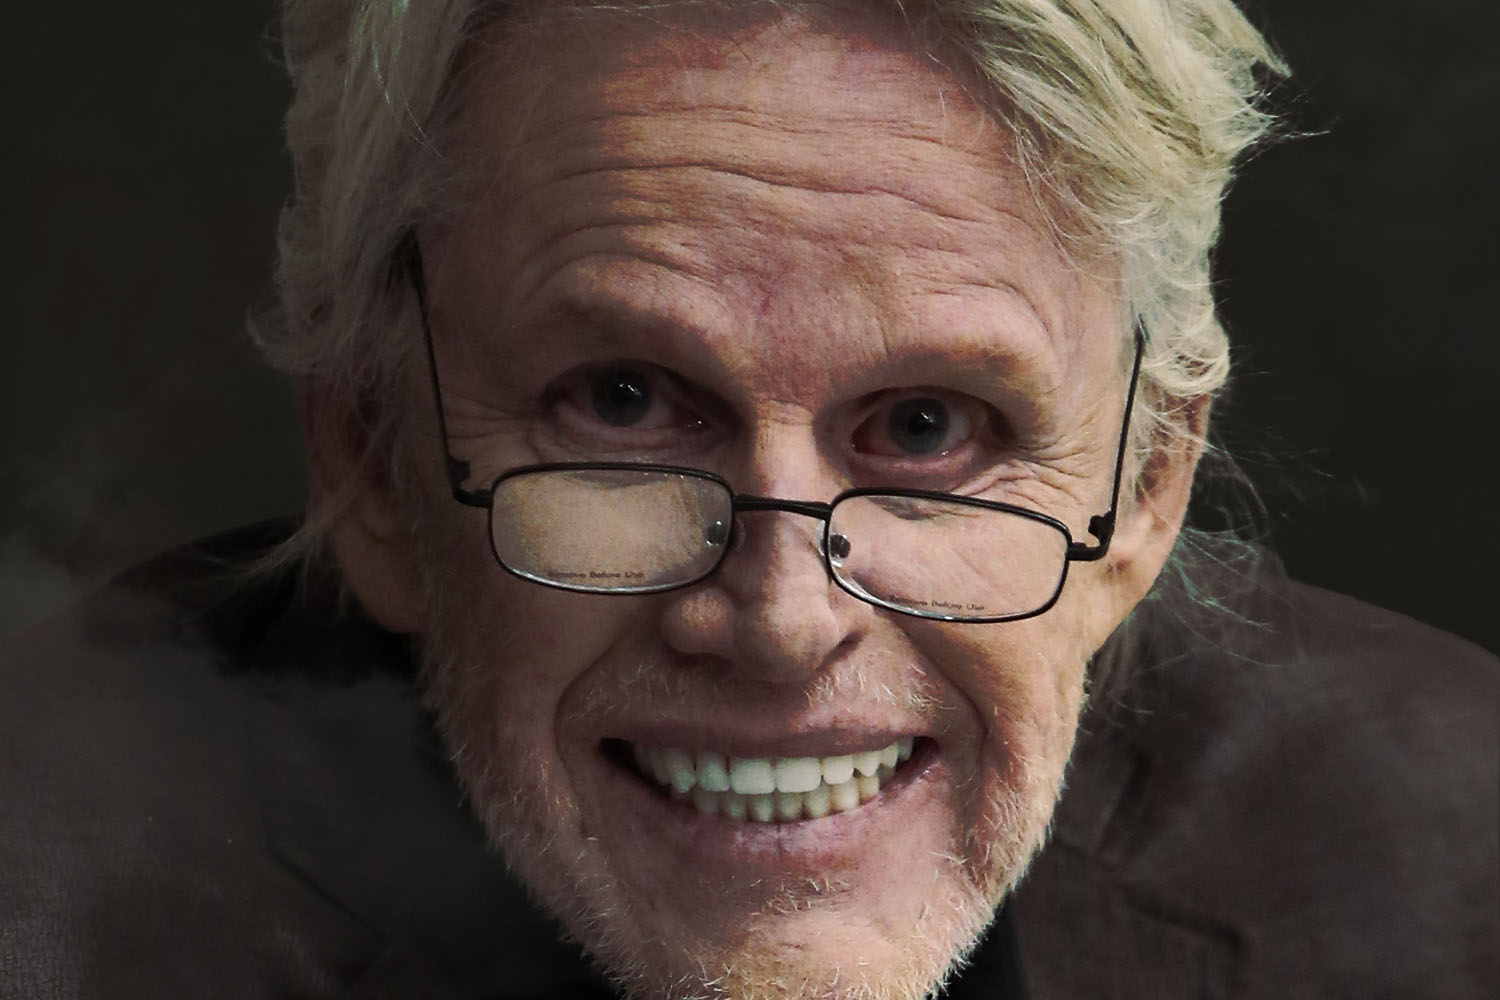 Gary Busey living in the walls of a house? Ahhhhhh!